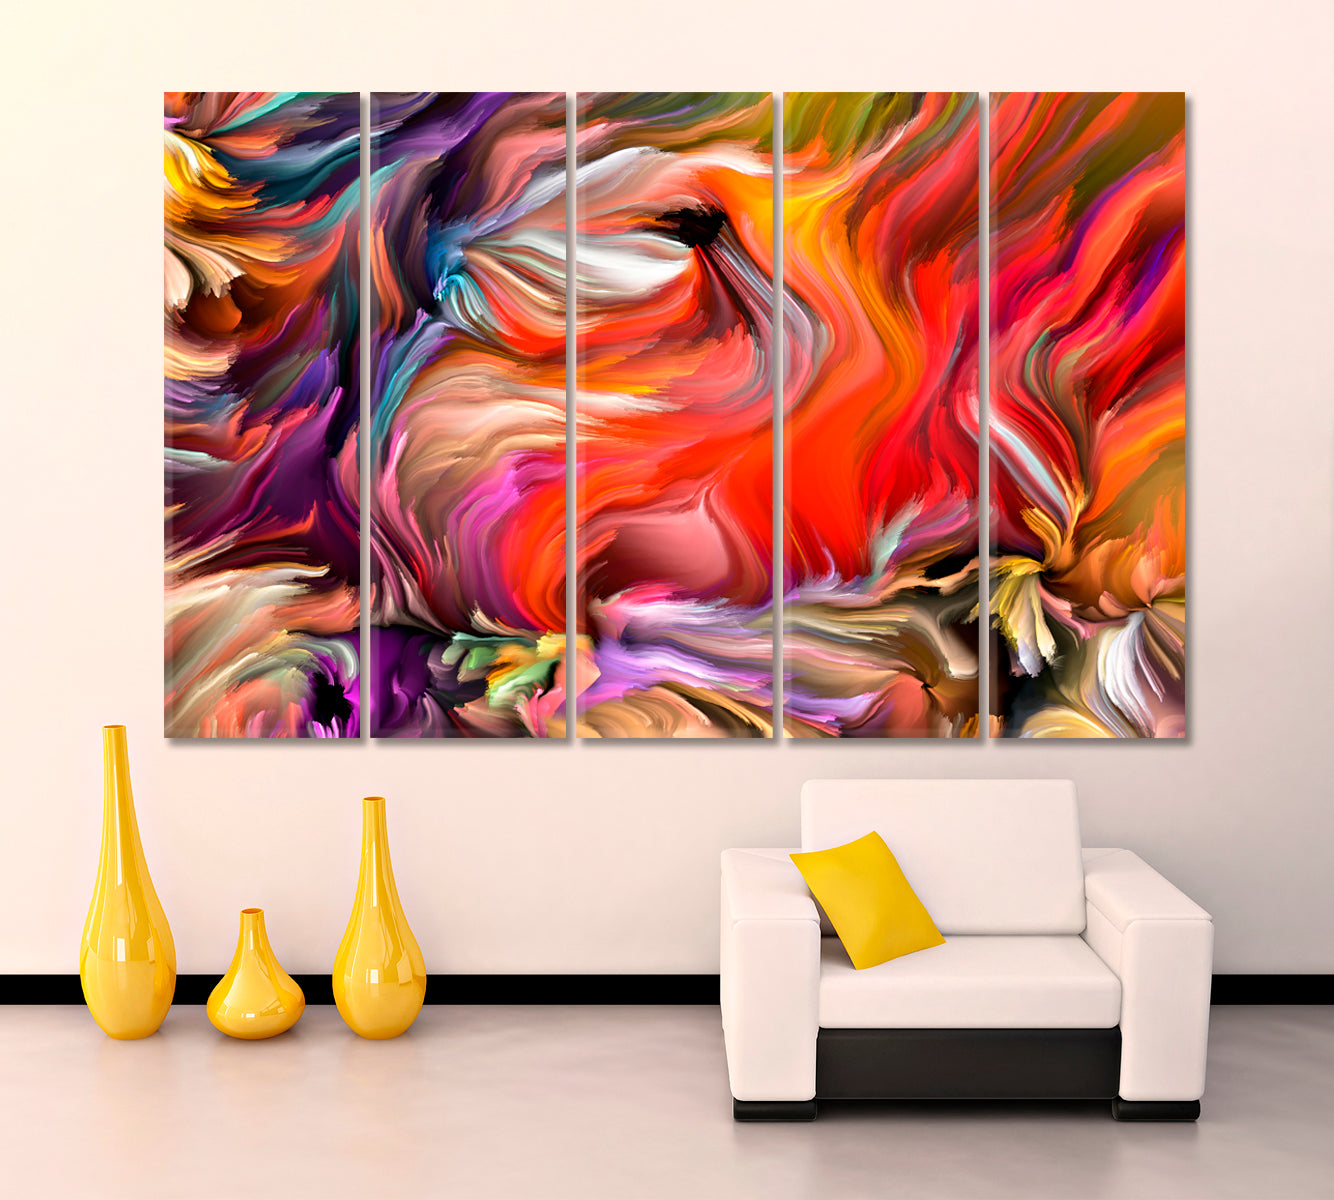 DYNAMIC COLORS FLOW Variegated Lines Abstract Design Abstract Art Print Artesty 5 panels 36" x 24" 